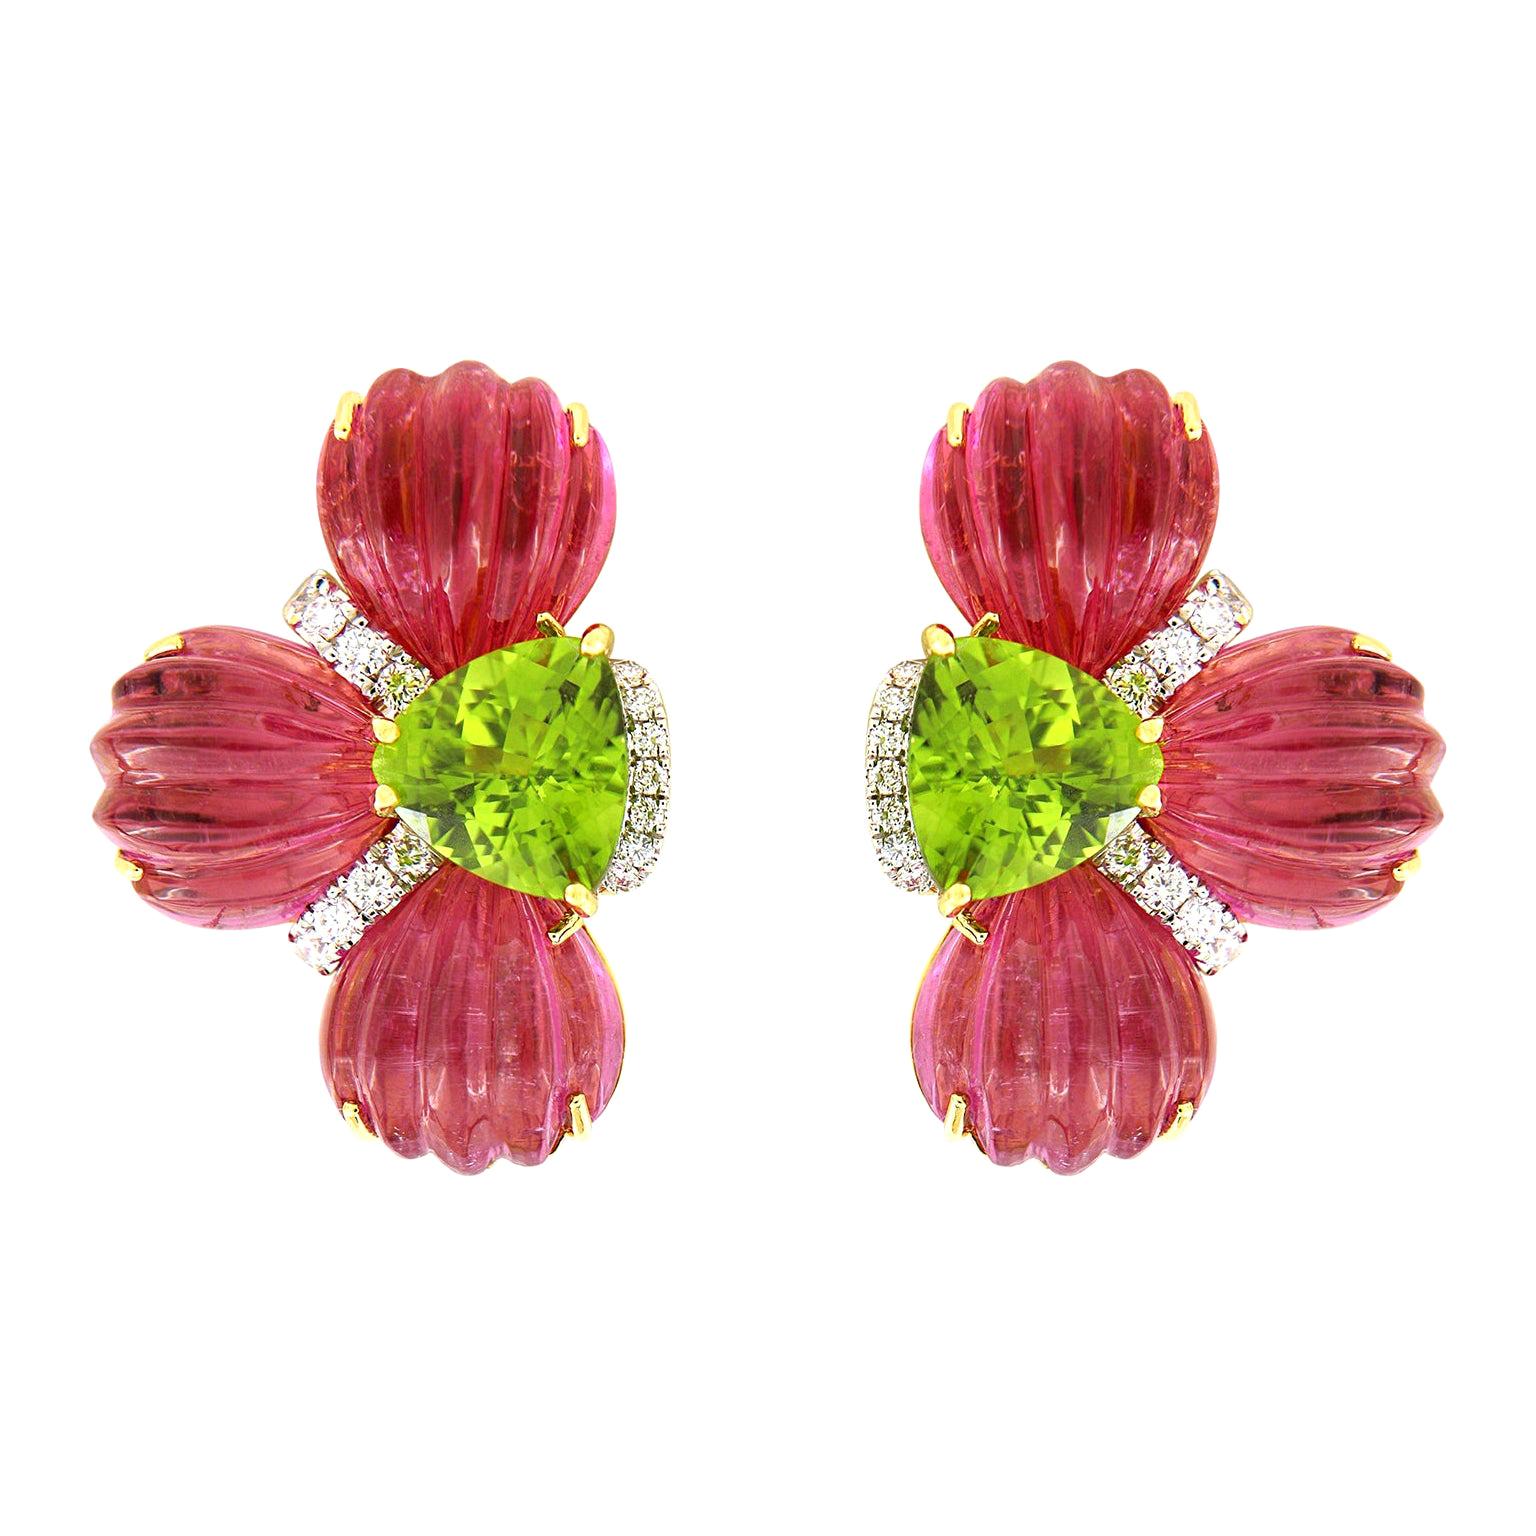 Valentin Magro Hand Carved Rubellite and Trillian Peridot Earrings